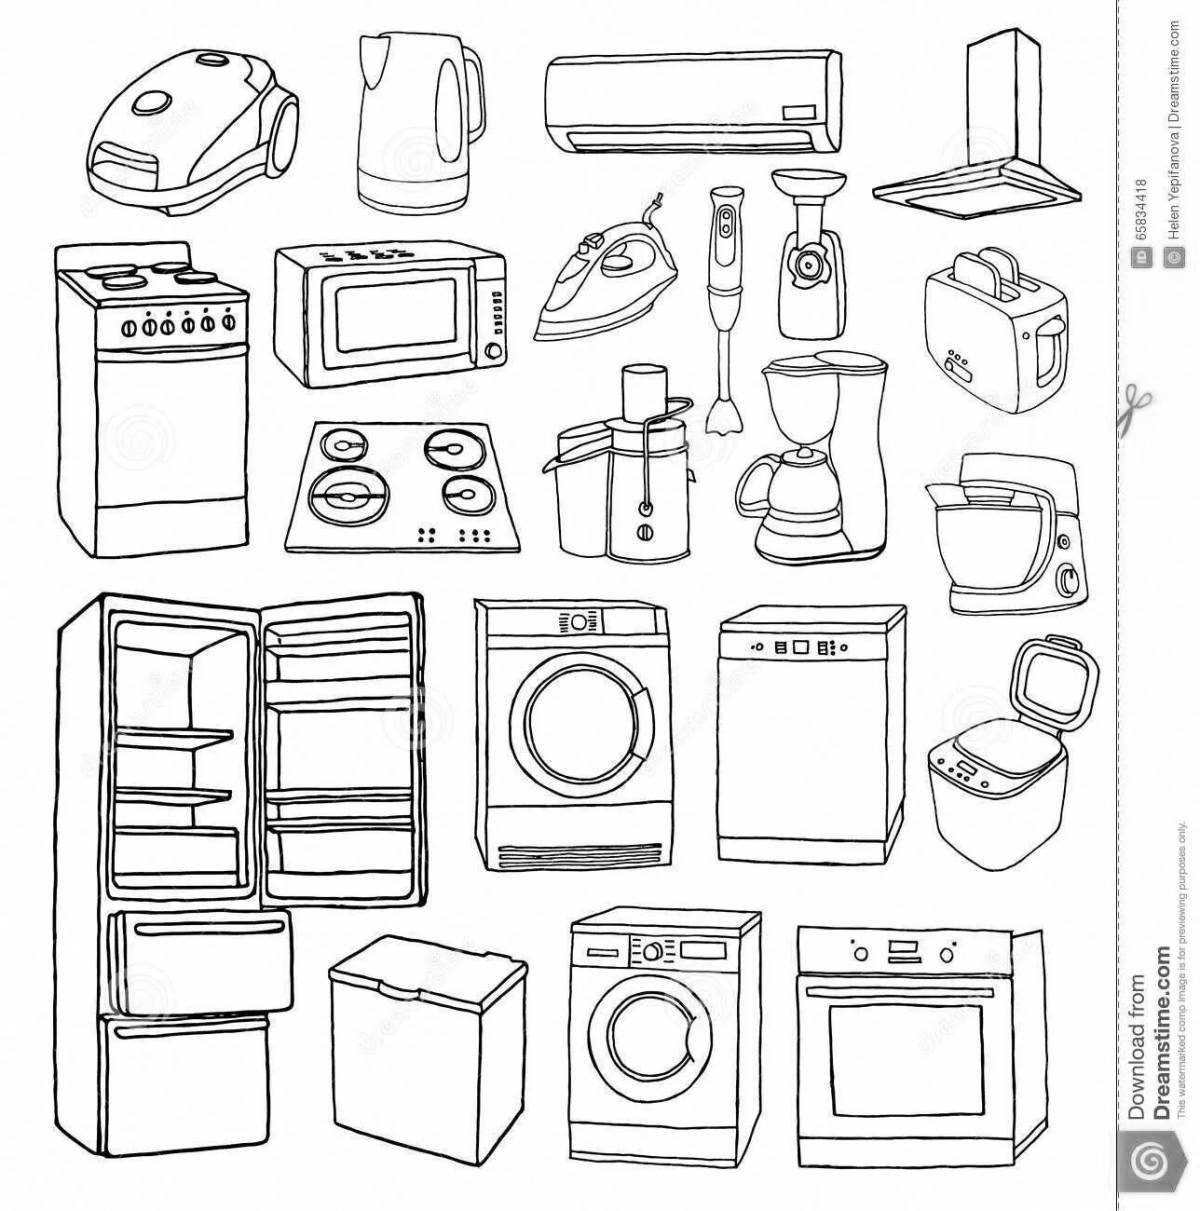 Colorful household appliances coloring book for children 5-6 years old